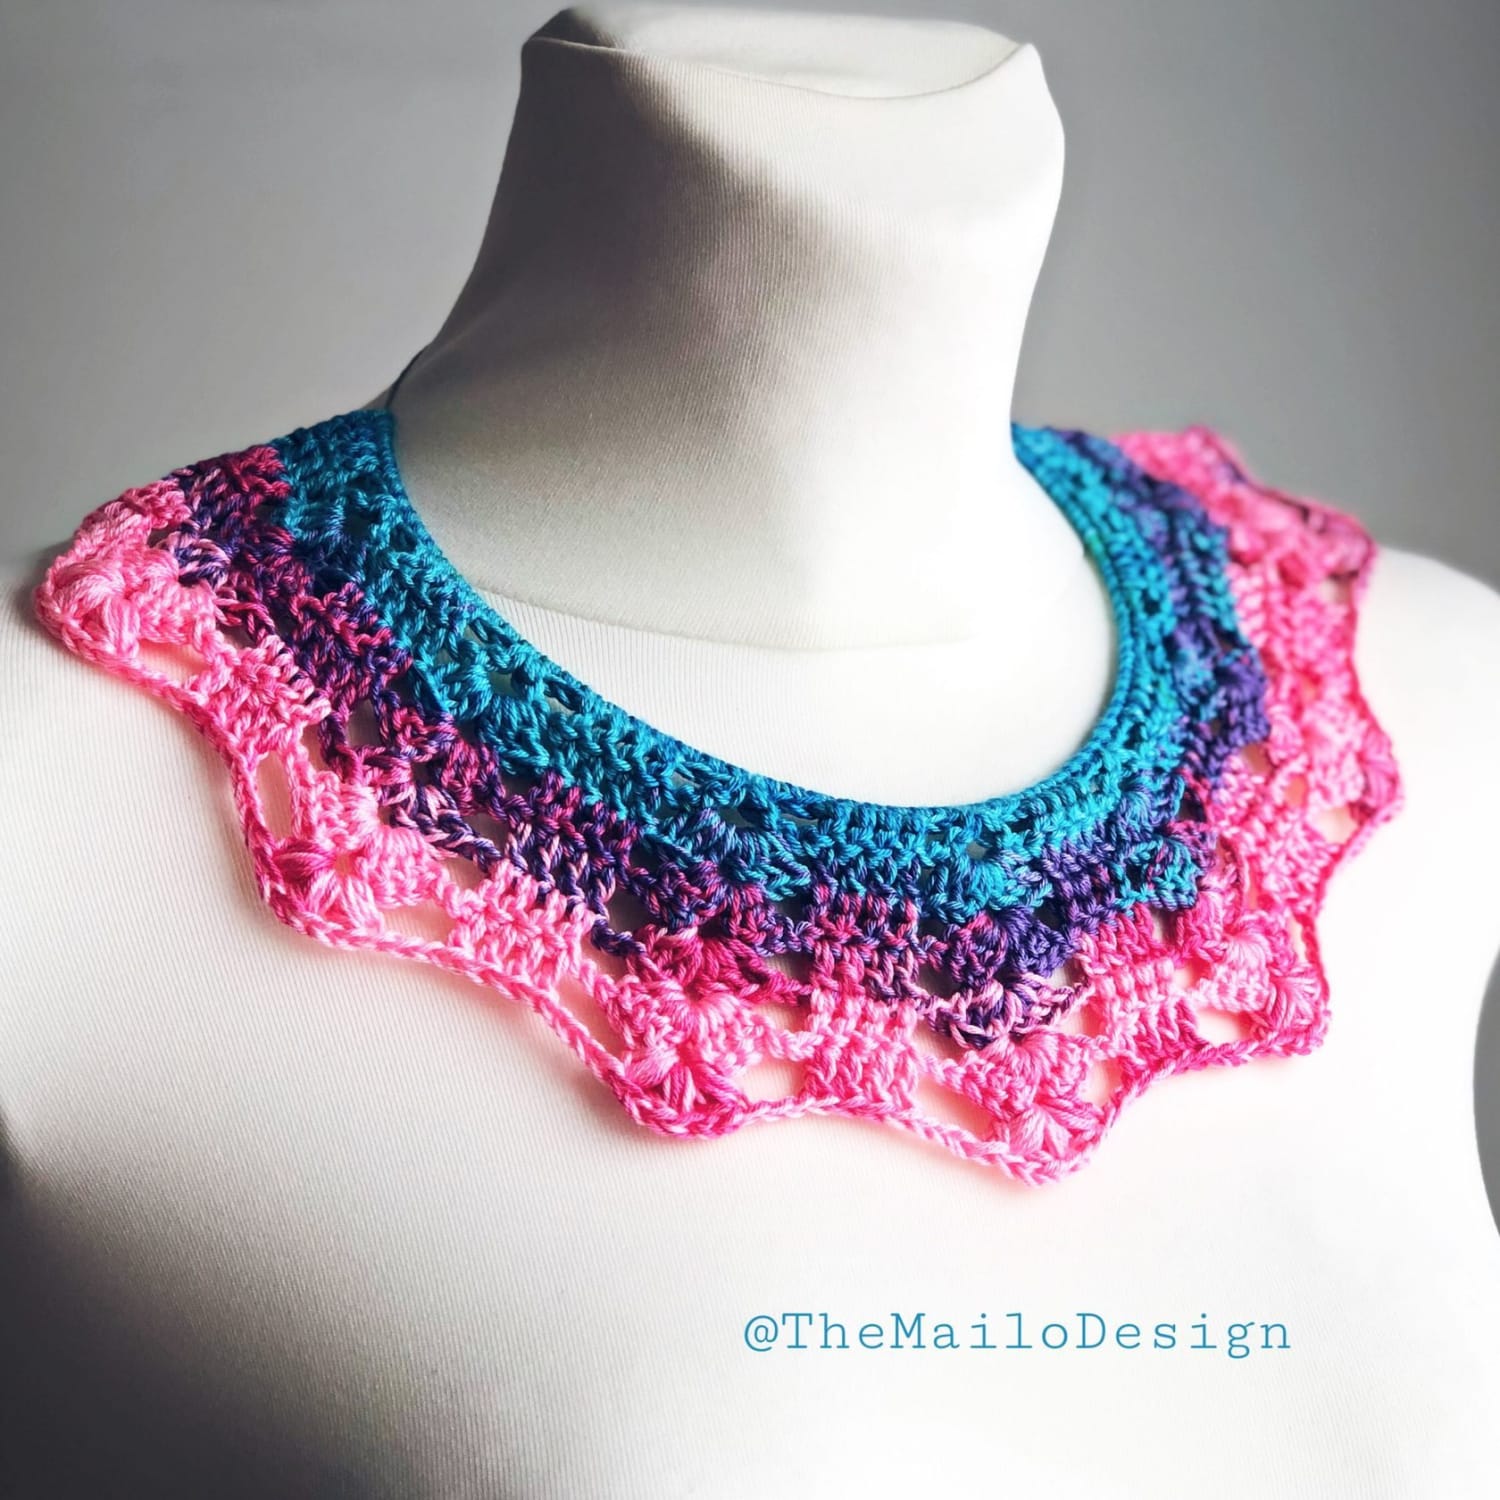 Crochet Necklace patterns - TheMailoDesign